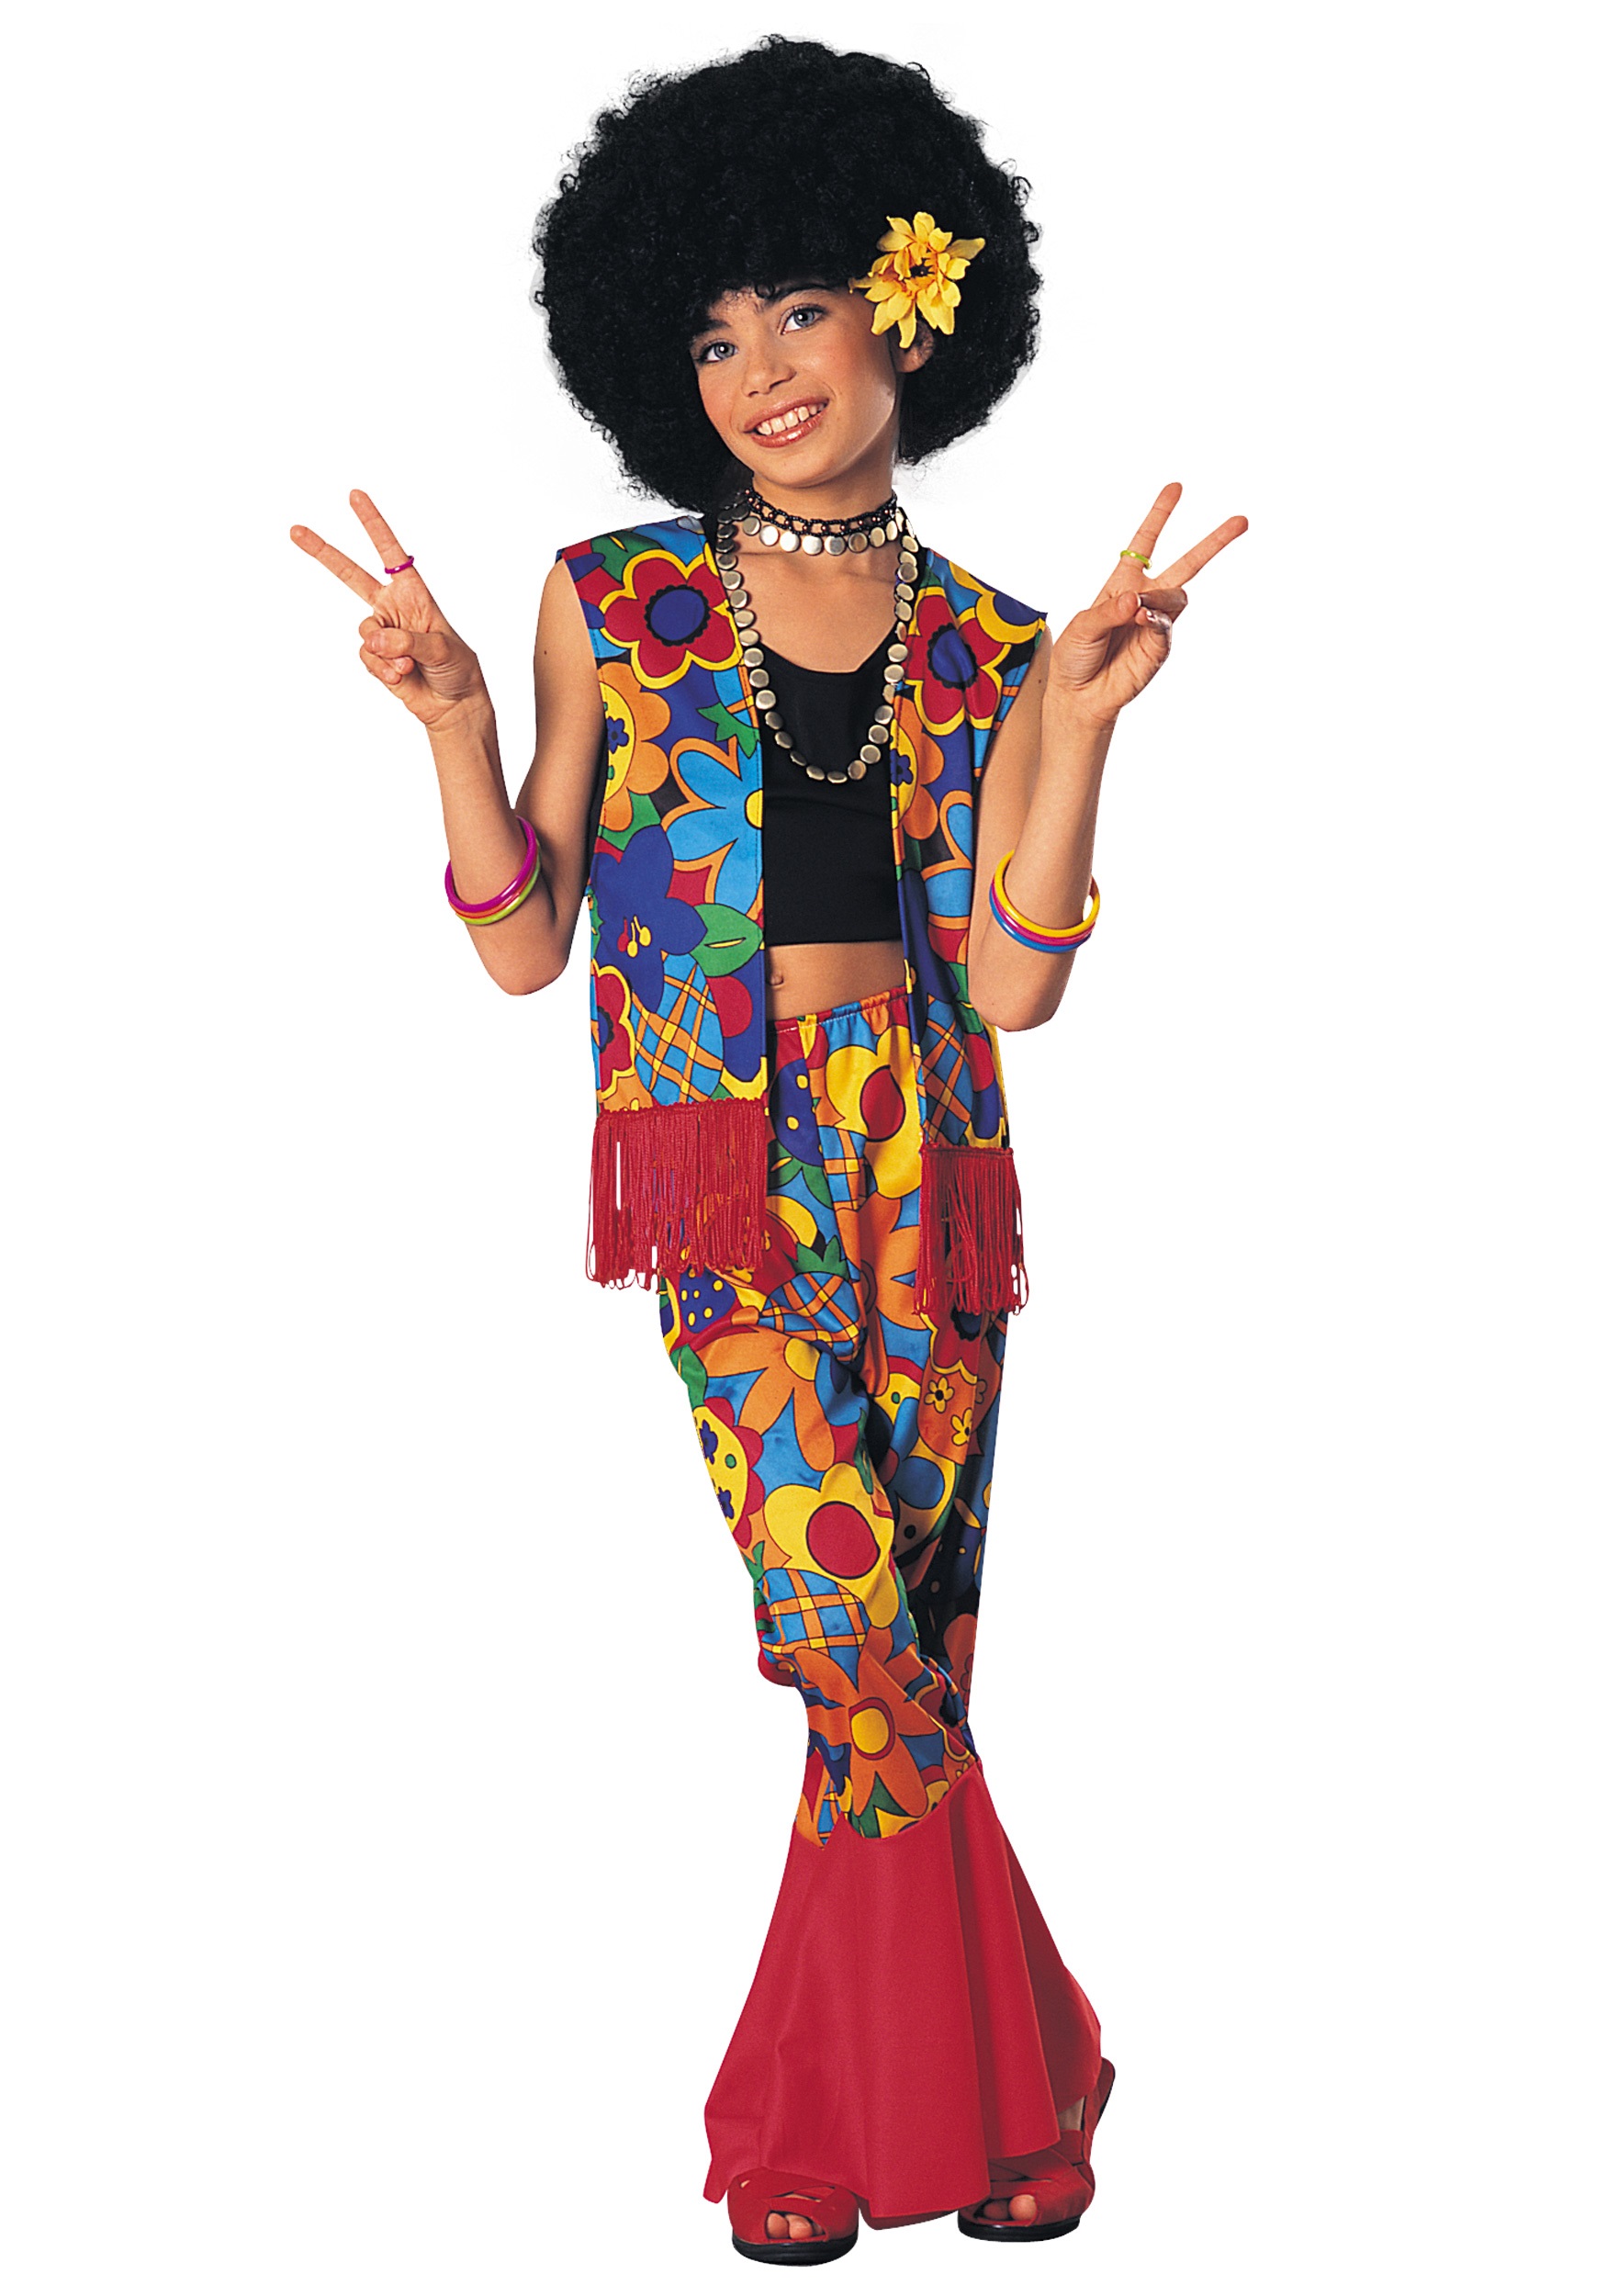 Hippie Costumes & Outfits For Adults & Kids 